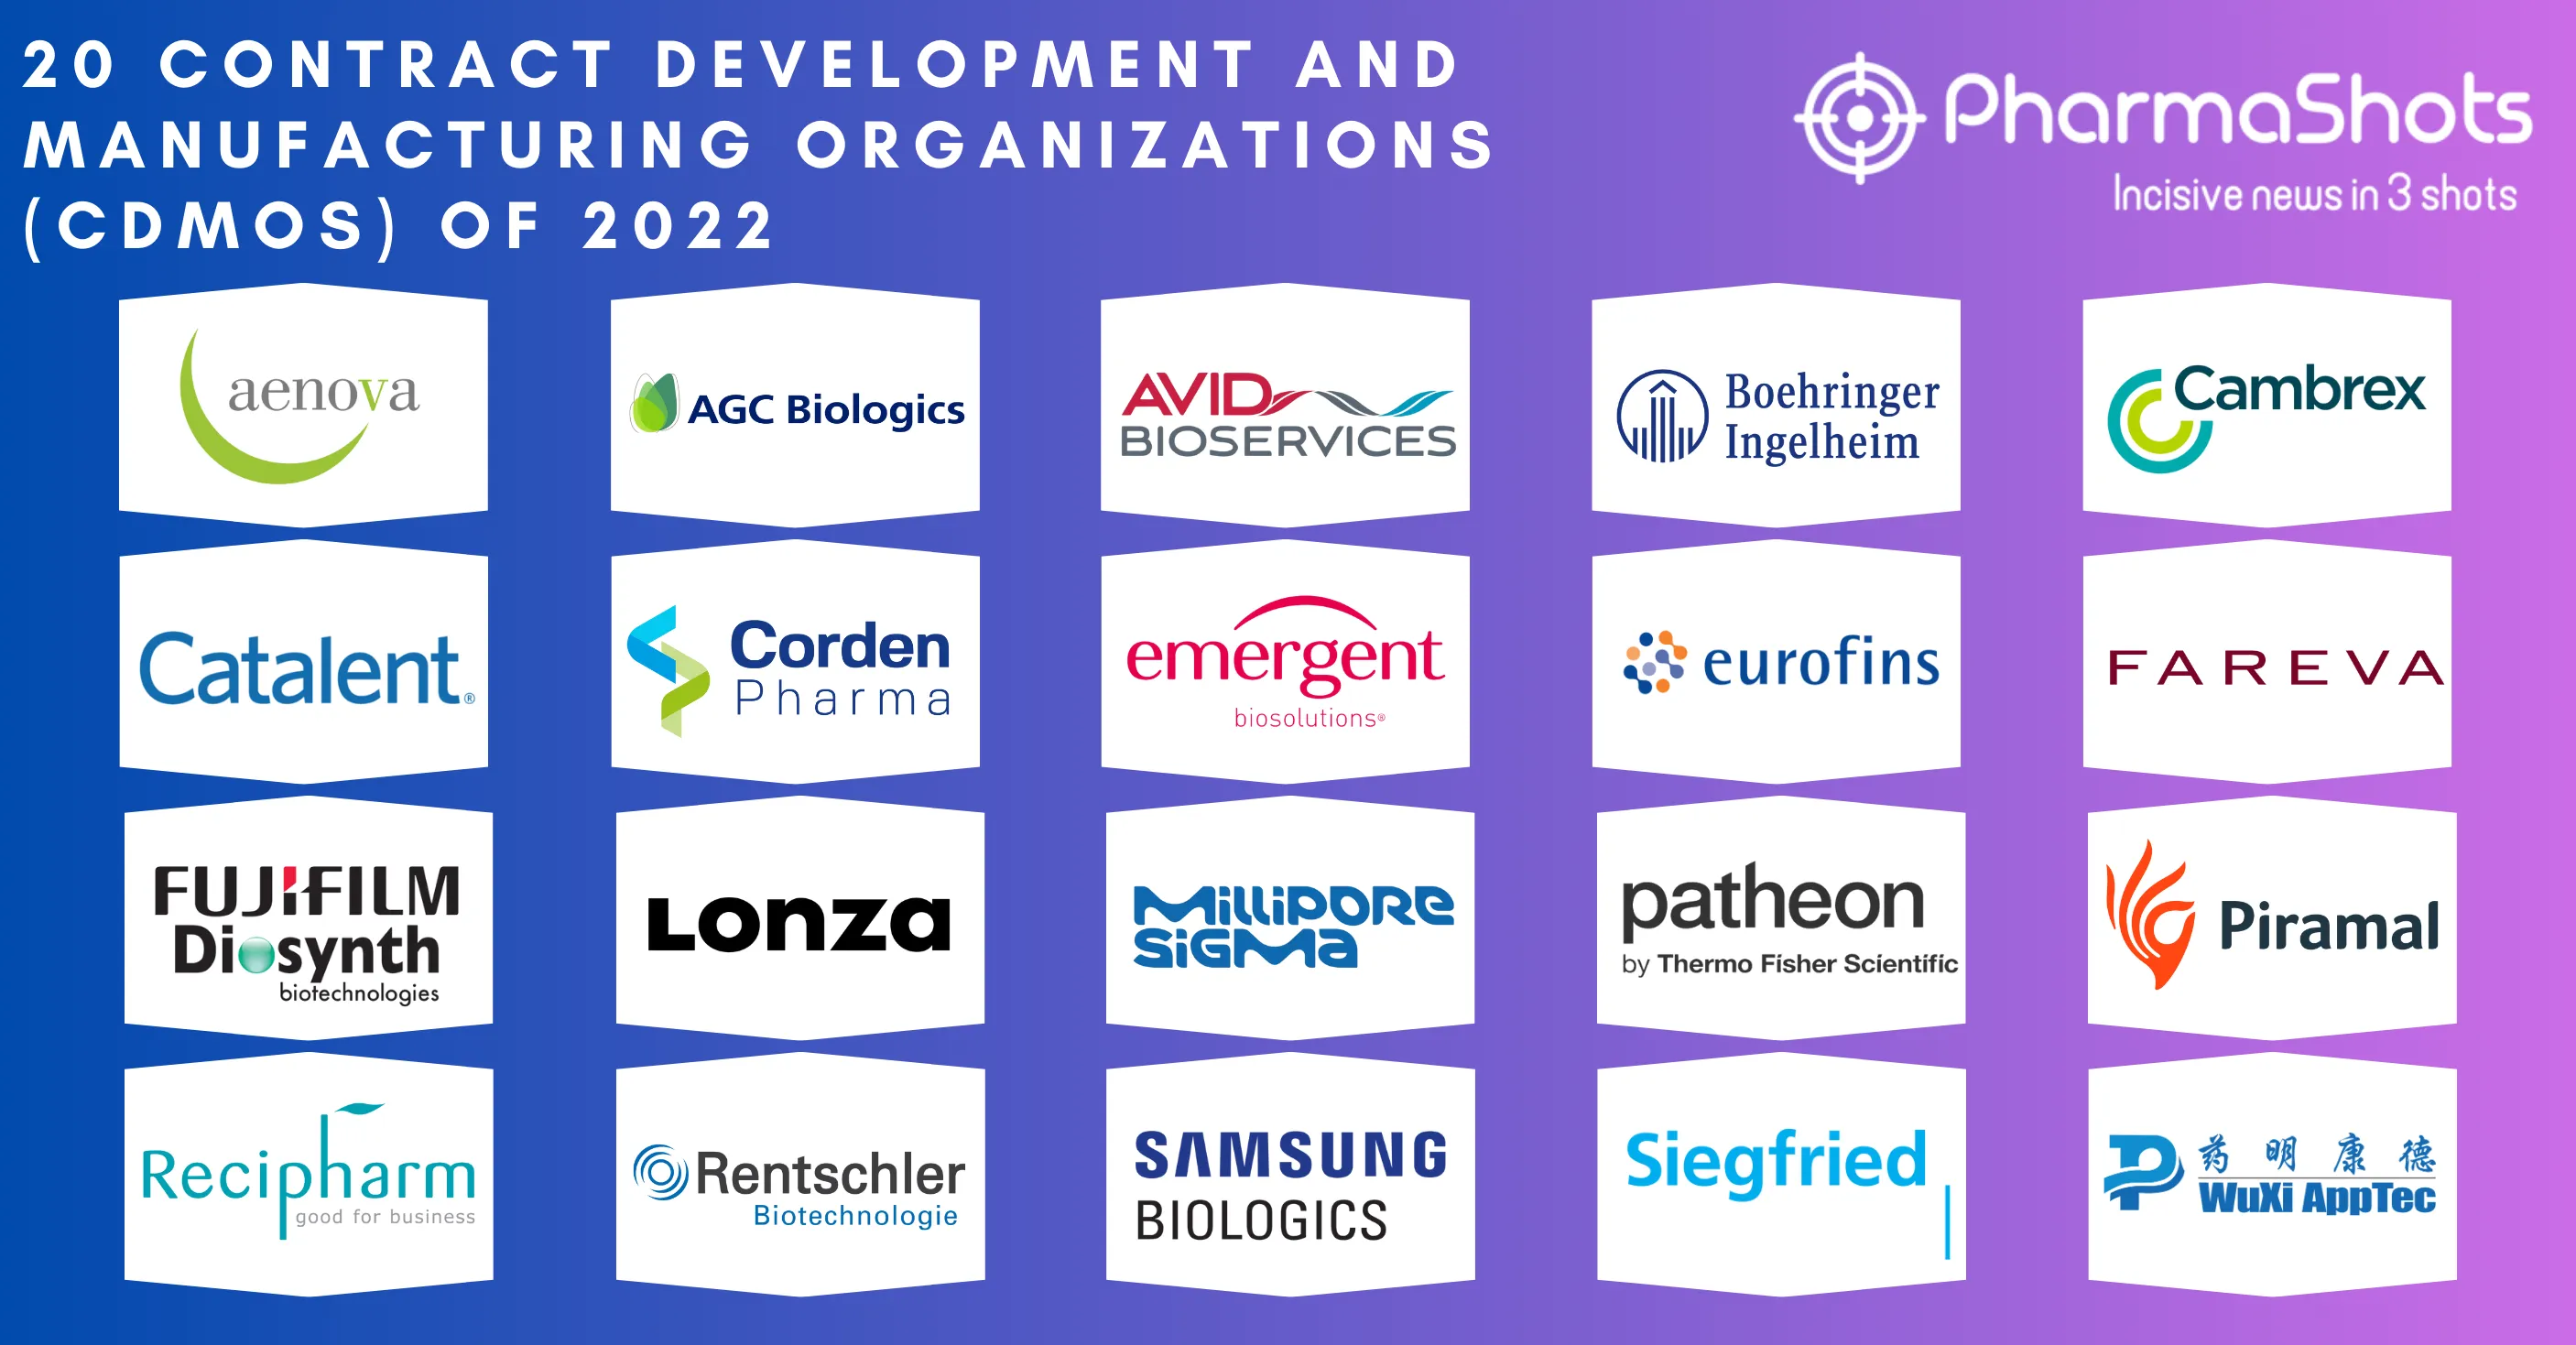 20 Contract Development and Manufacturing Organizations (CDMOs) of 2022